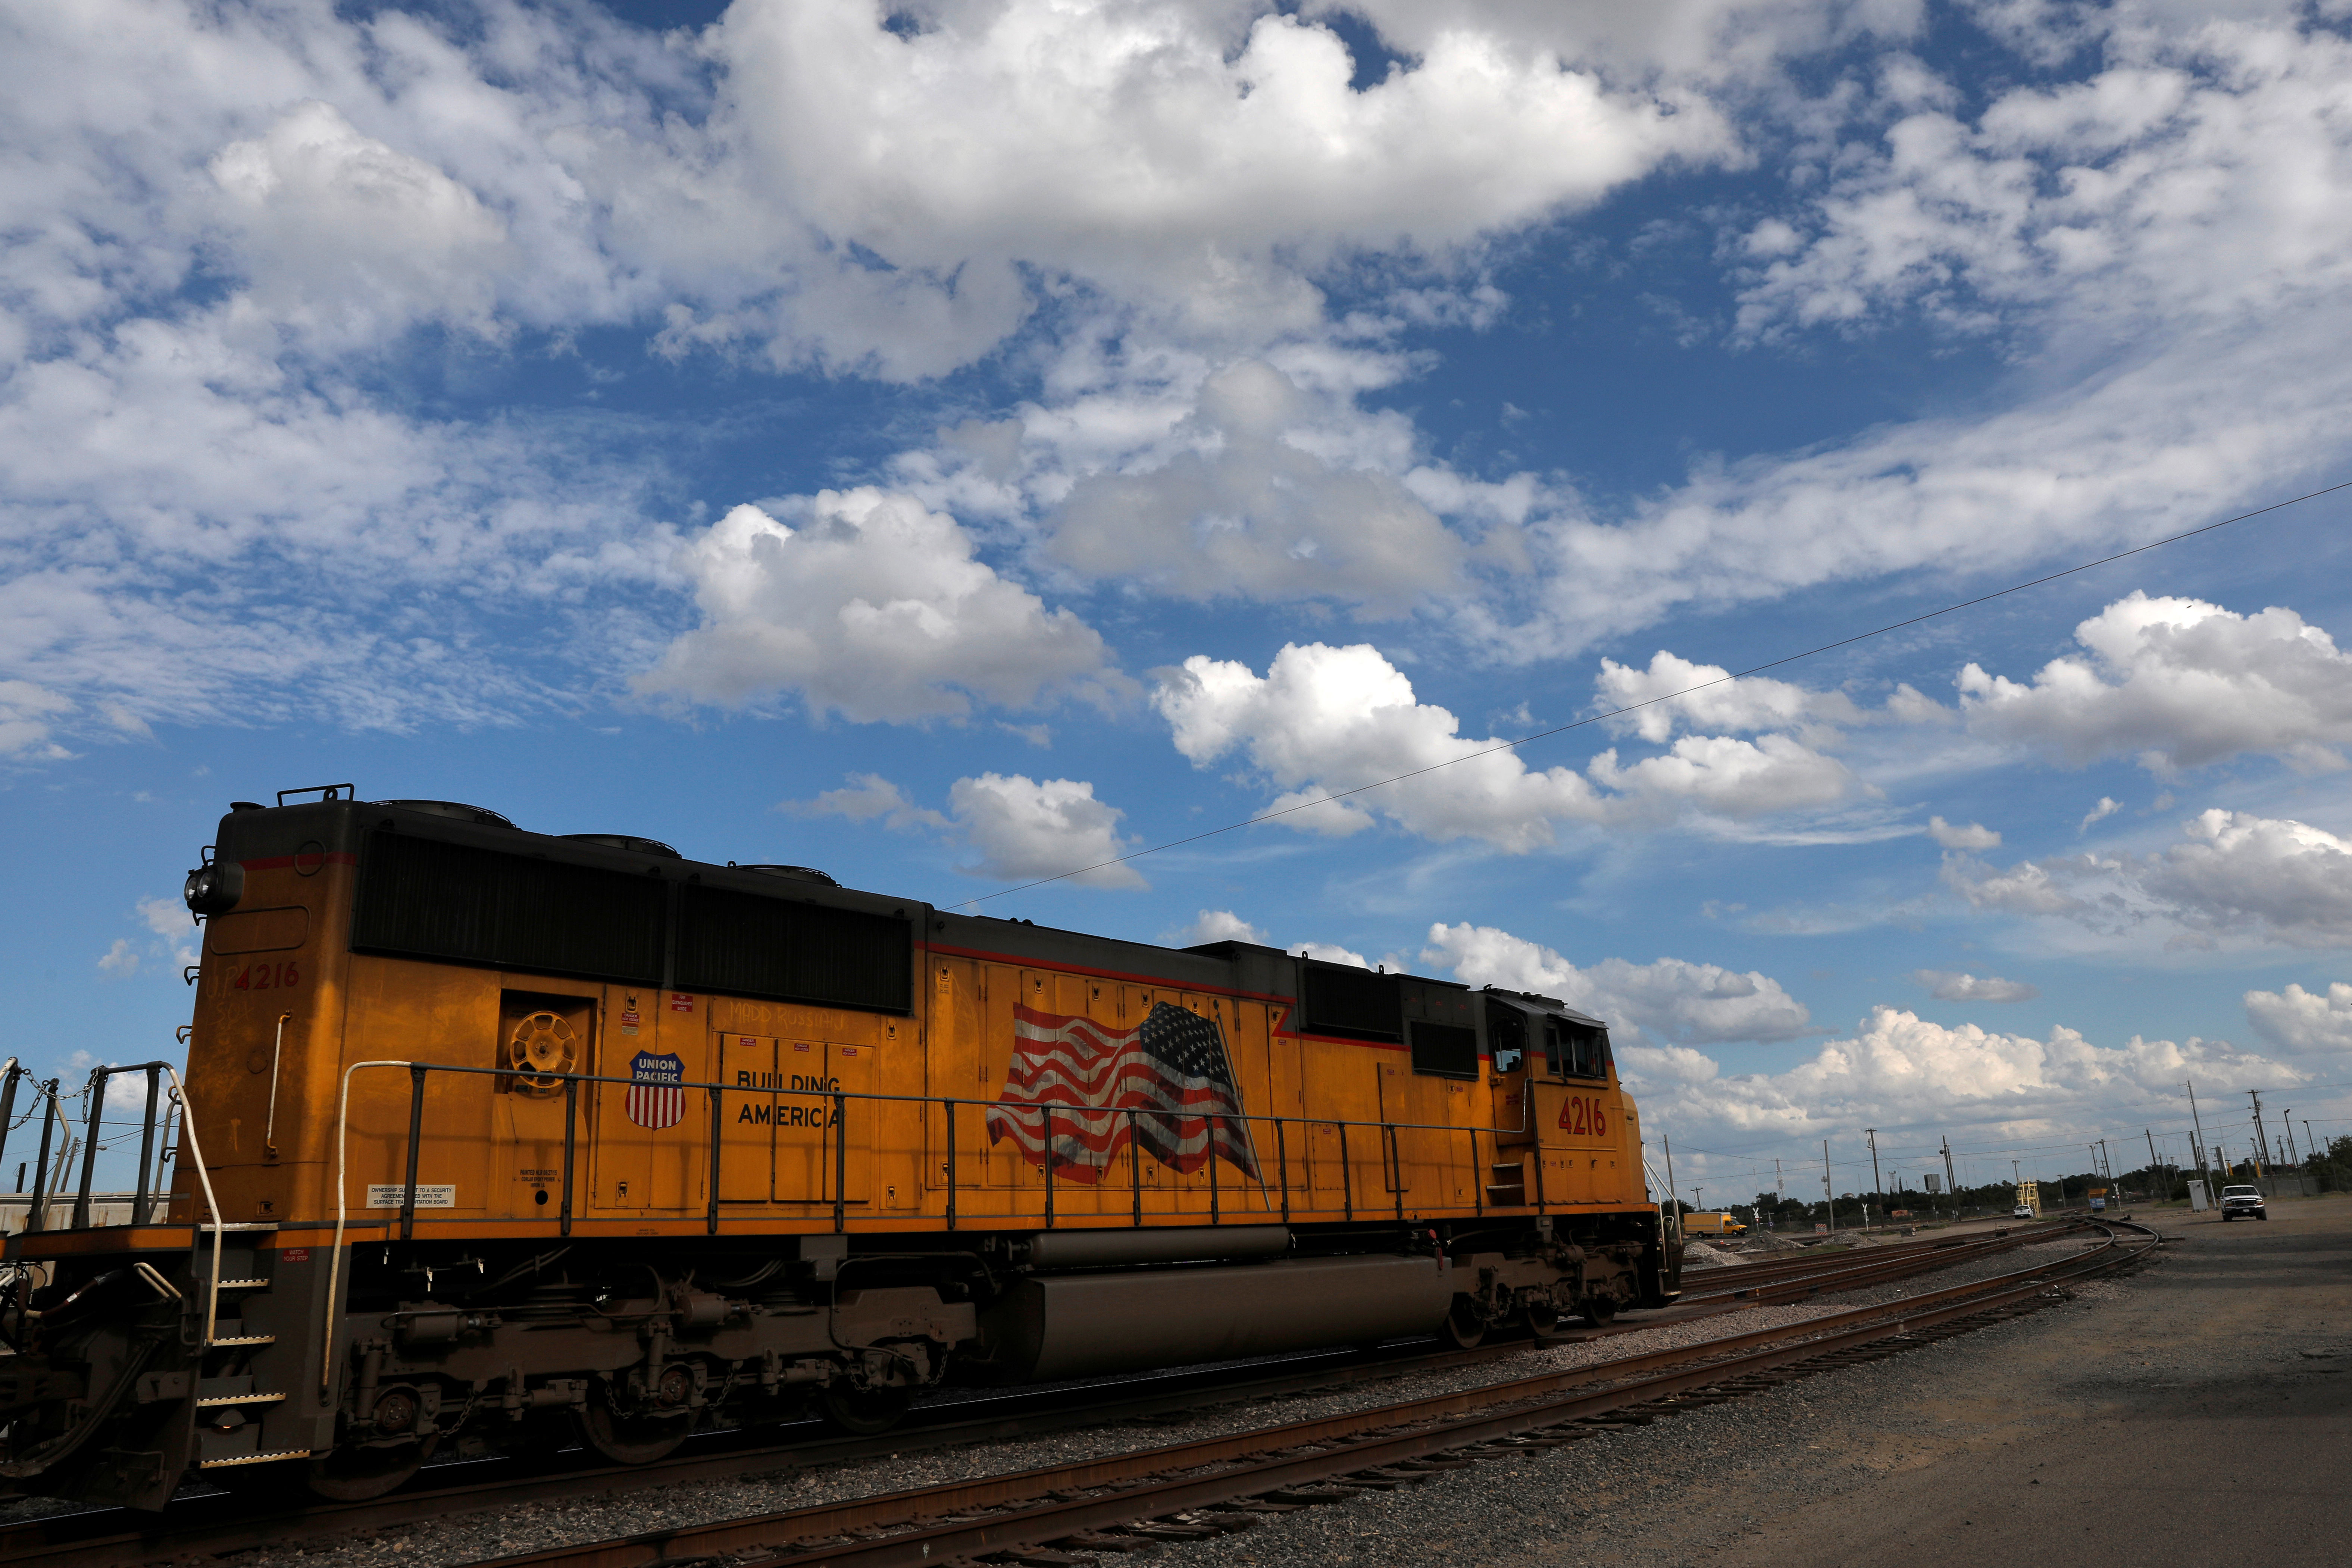 A cargo train is seen near the border between the U.S. and Mexico, in Laredo